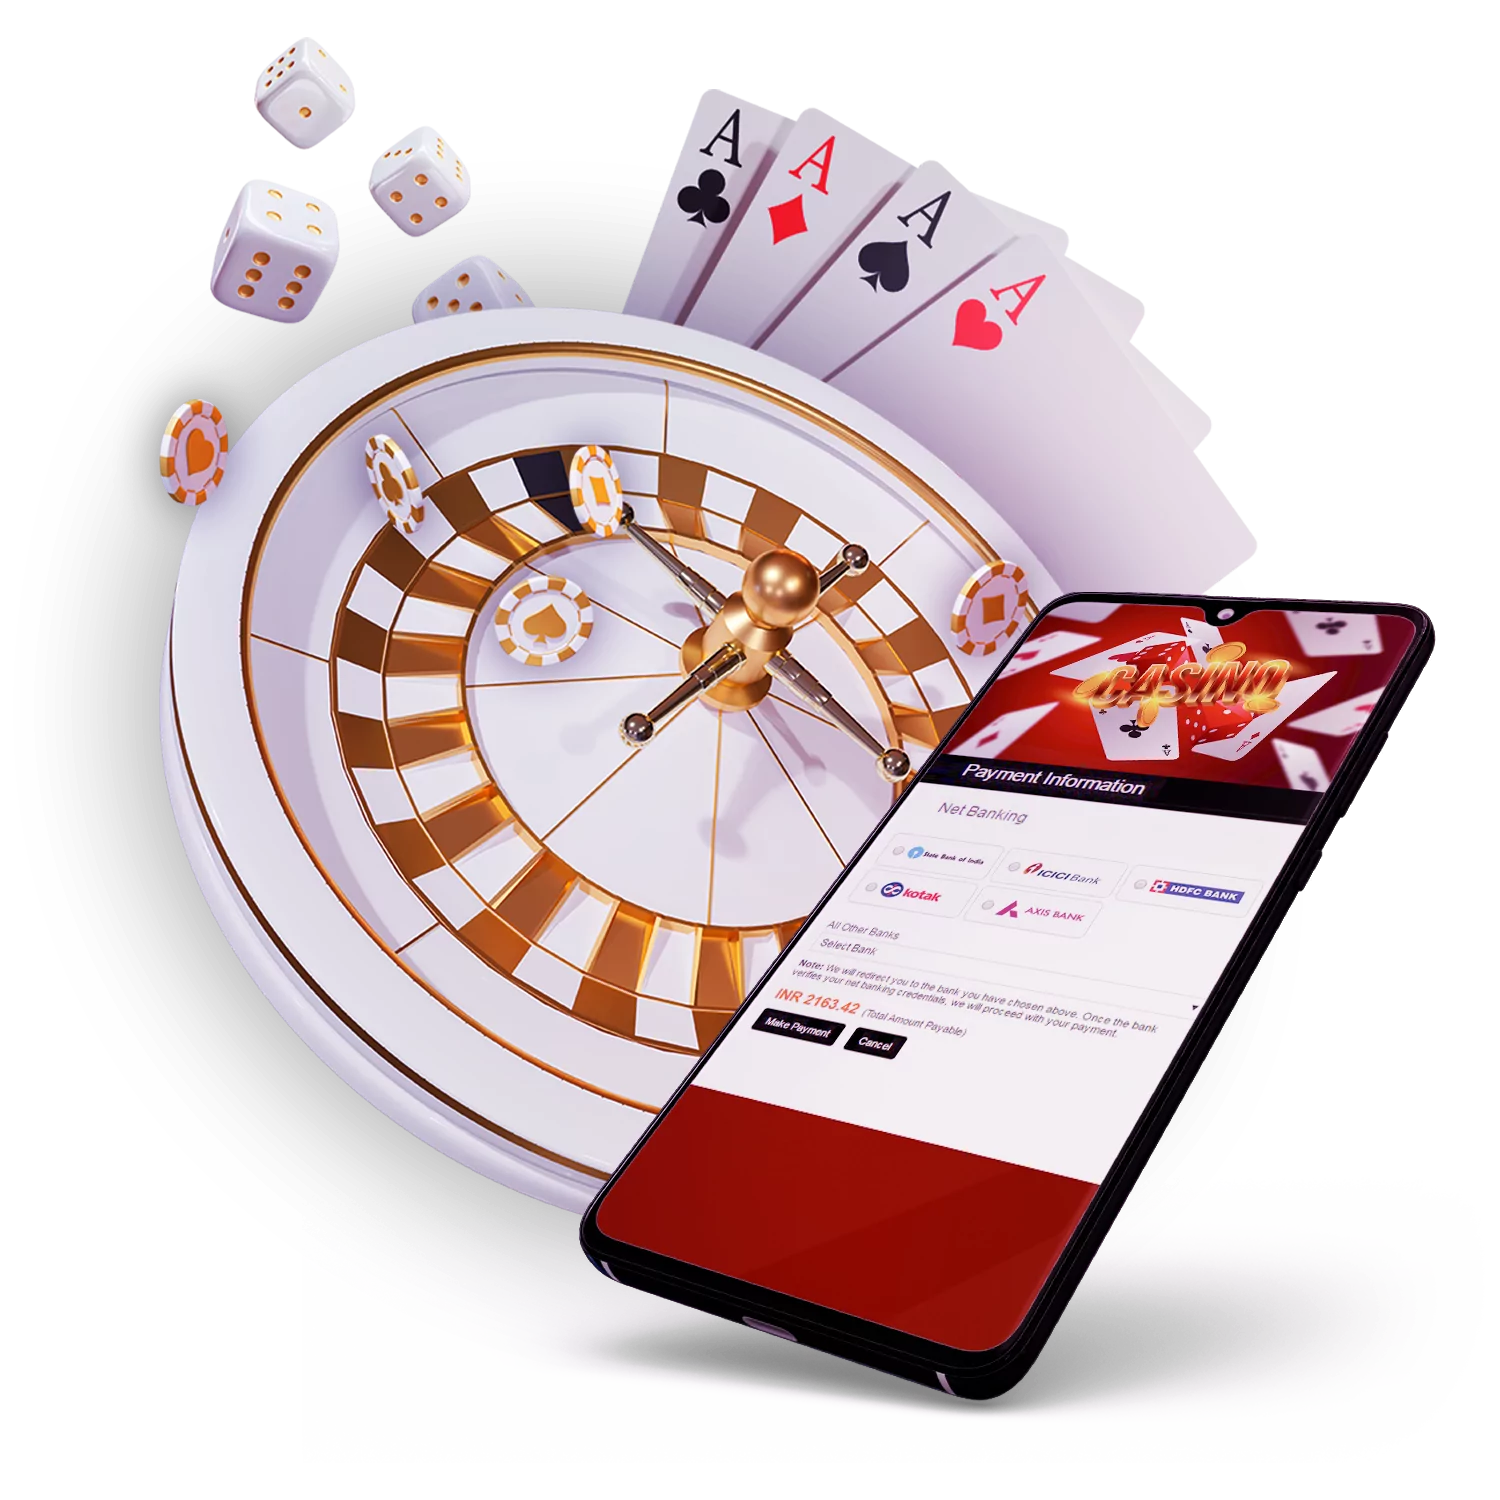 Find out from this article how to use NetBanking to transfer money to and from your online casino.